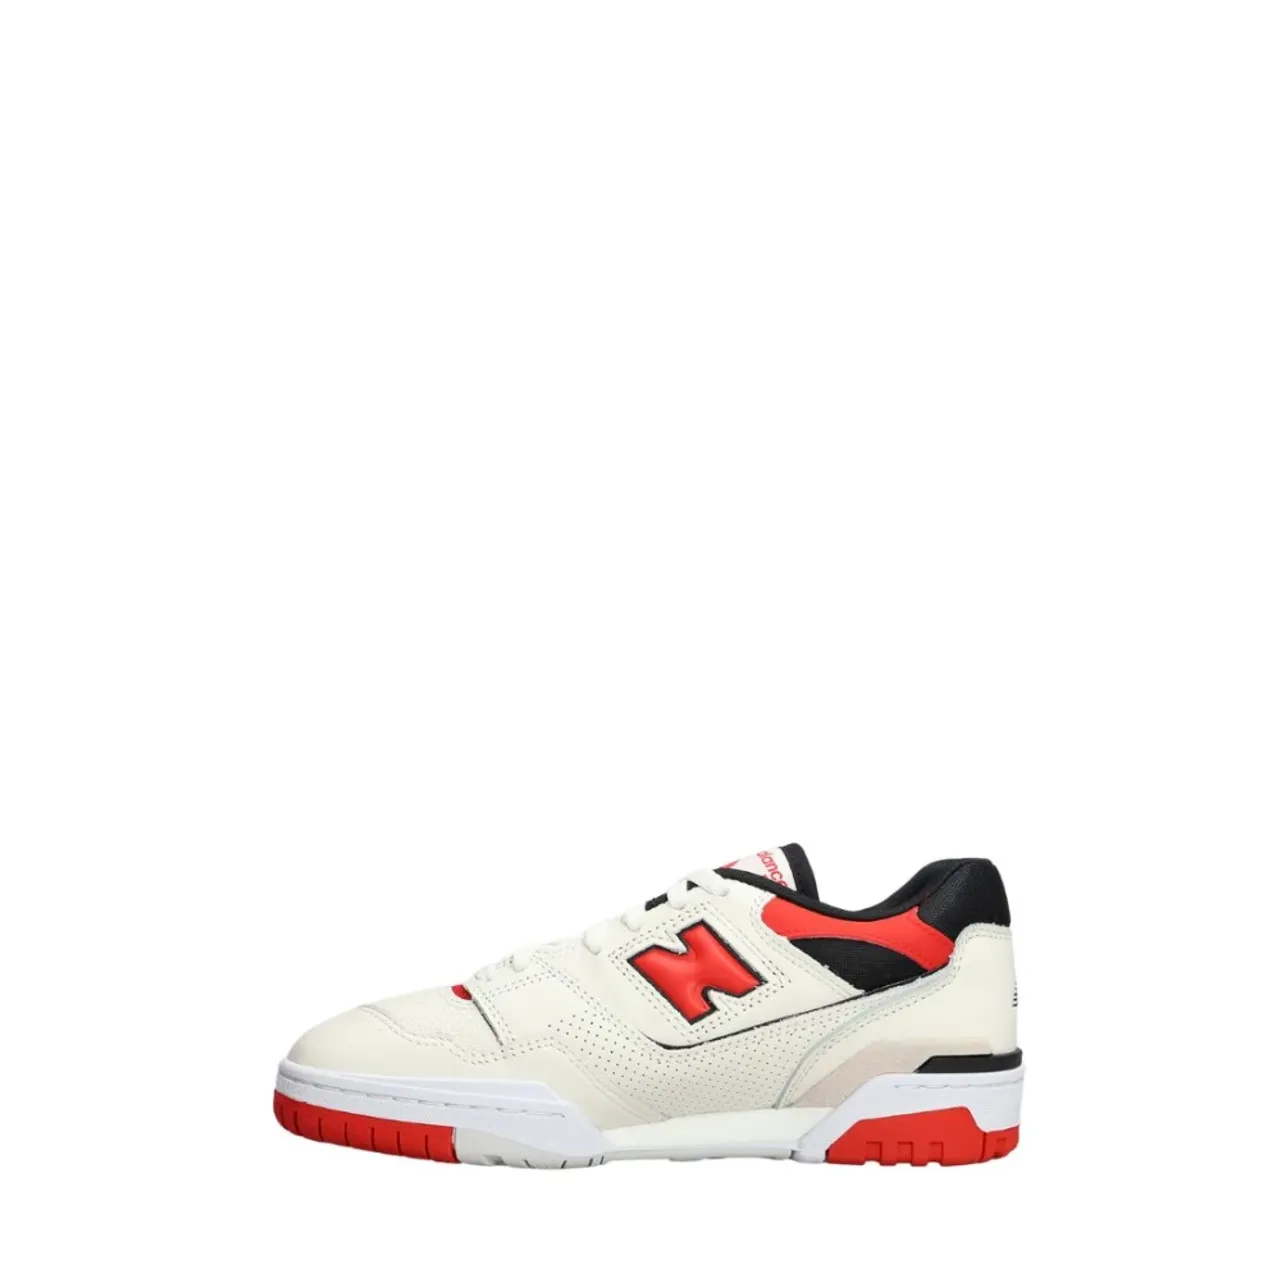 New Balance , Red Flat Sneakers 550 Inspired by 80s and 90s Basketball Models ,Multicolor male, Sizes: